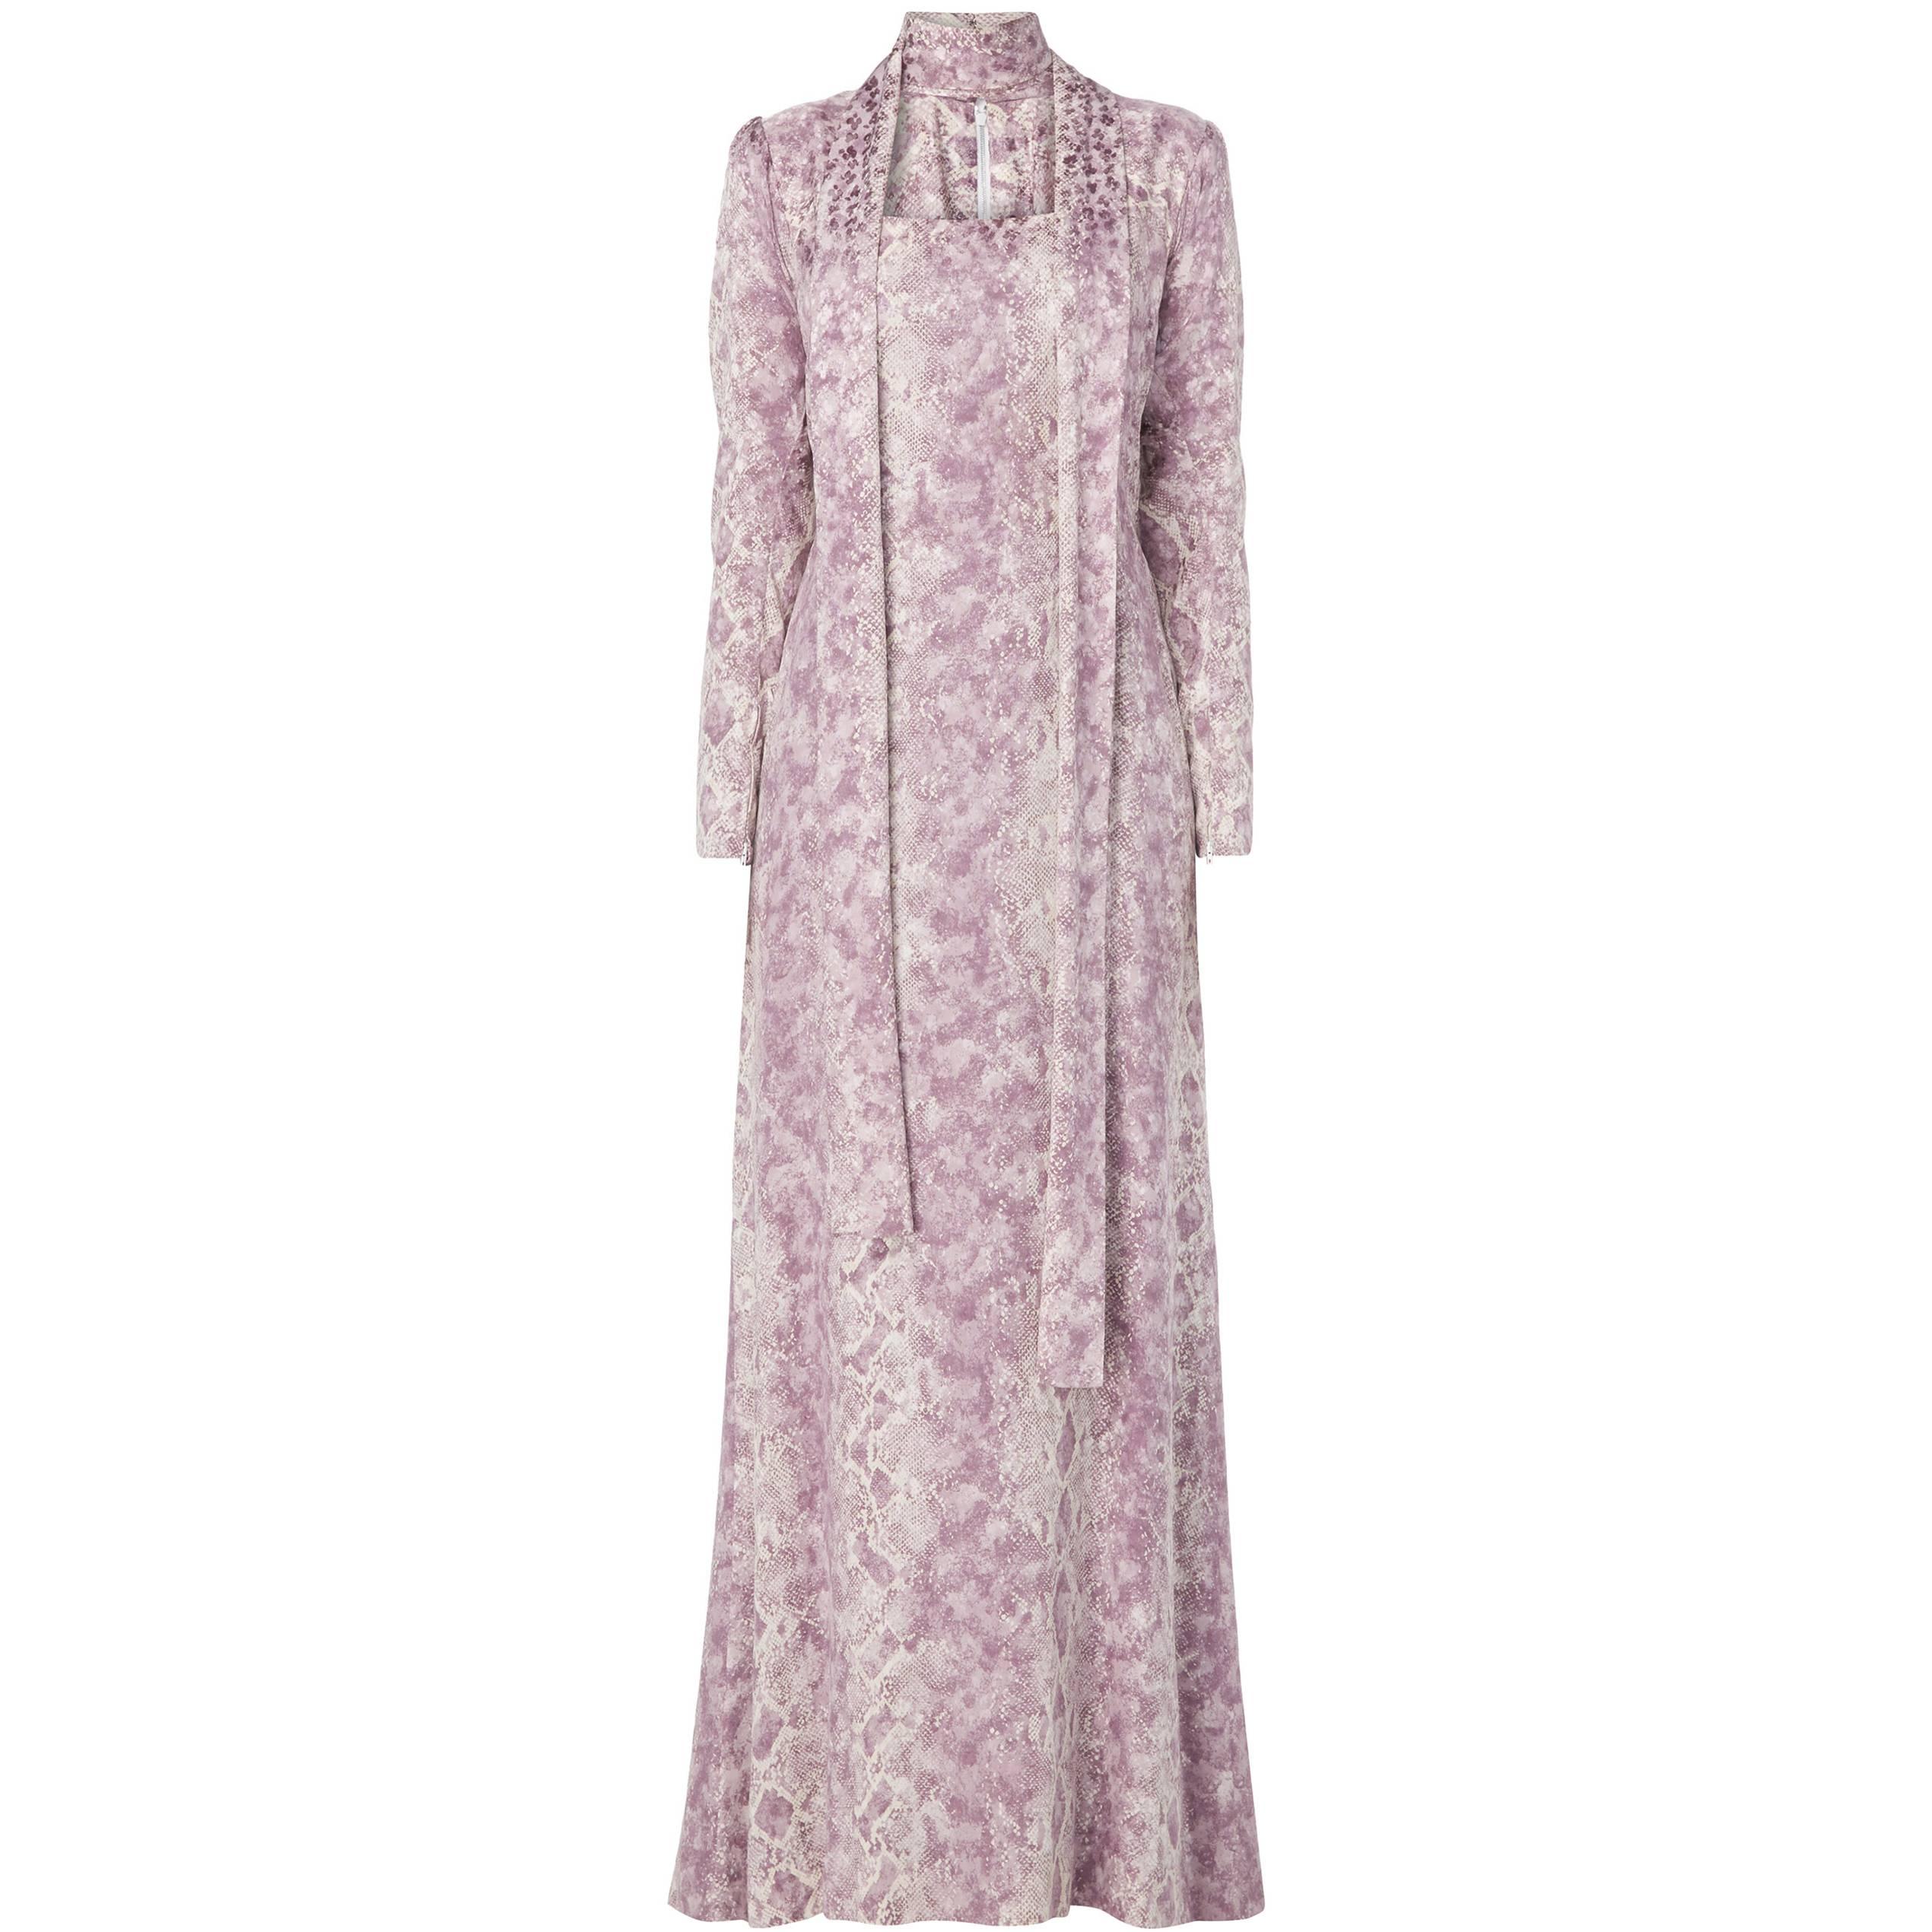 Yves Saint Laurent Haute Couture purple printed dress, Spring/Summer 1970 For Sale